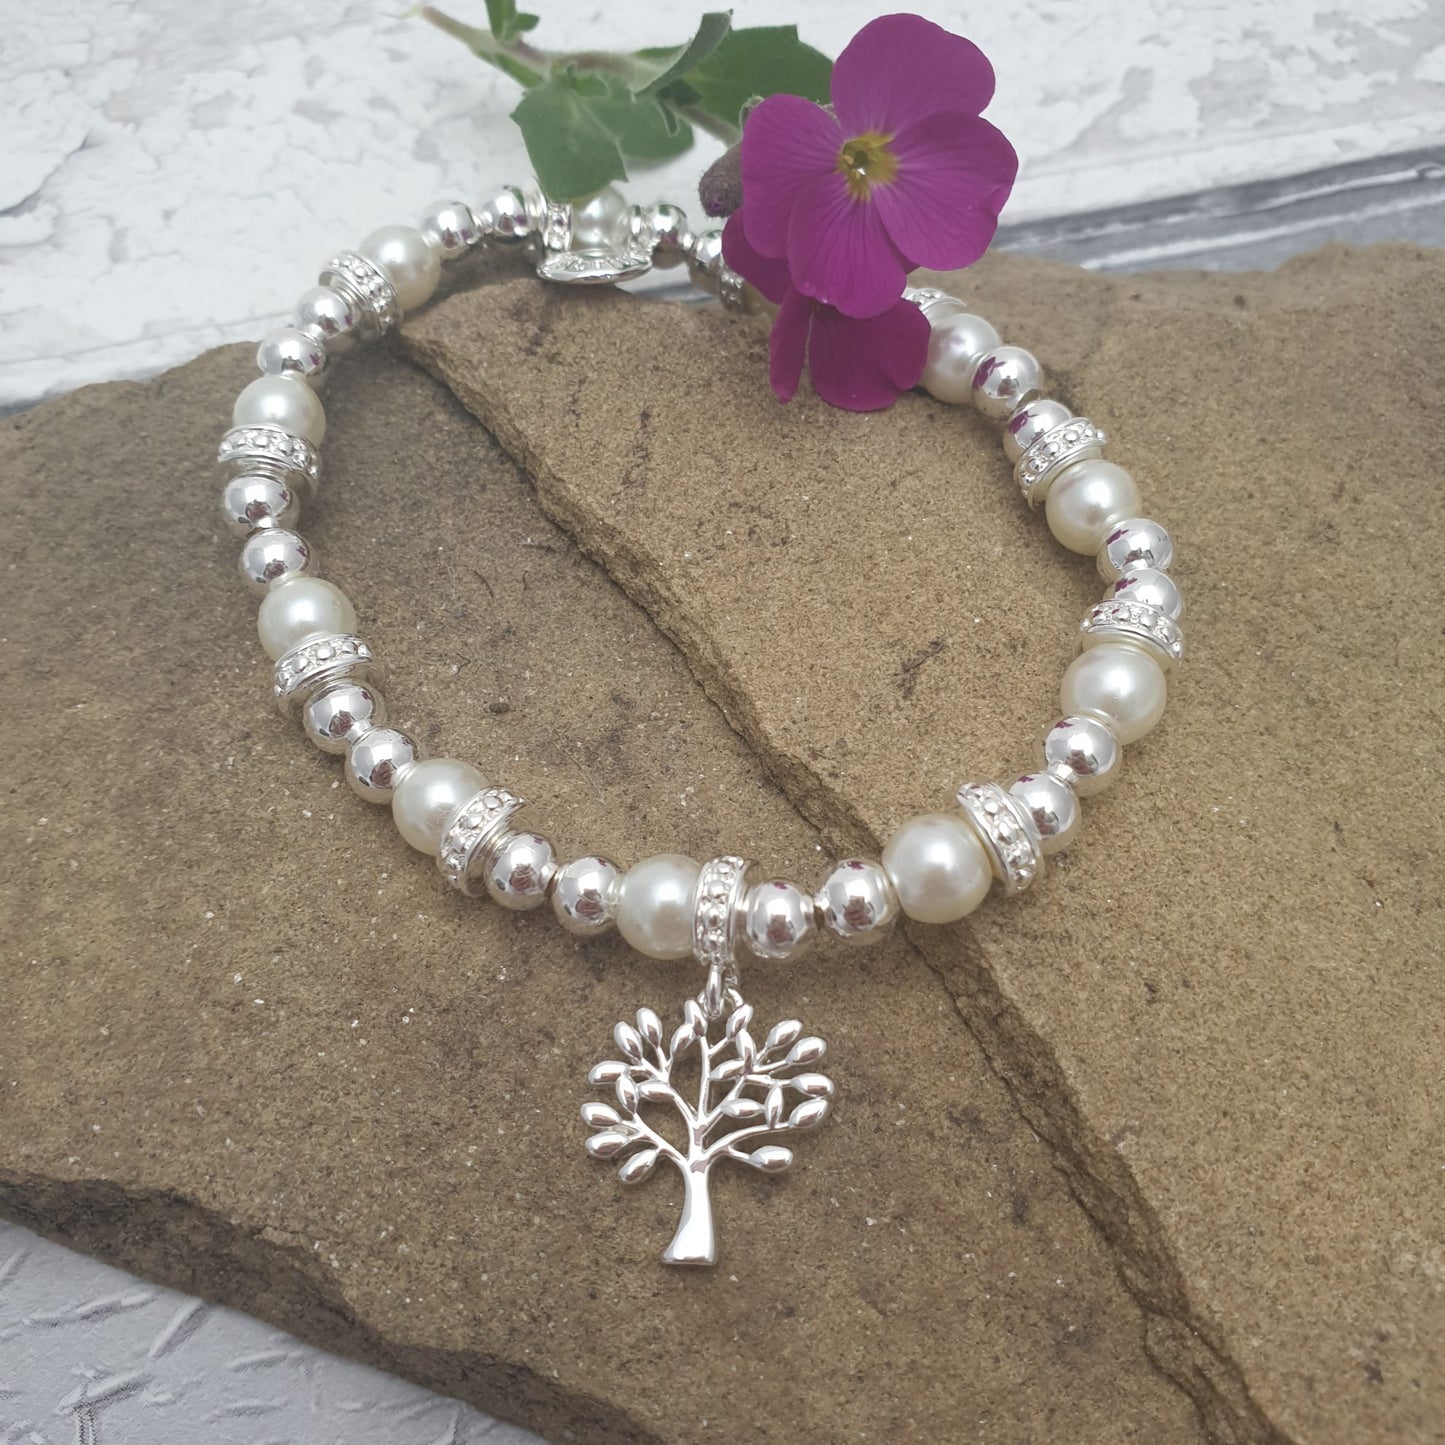 A silver and pearl Stretch bracelet with diamante covered spacers. Hanging from the bracelet is a silver covered Tree of Life charm.